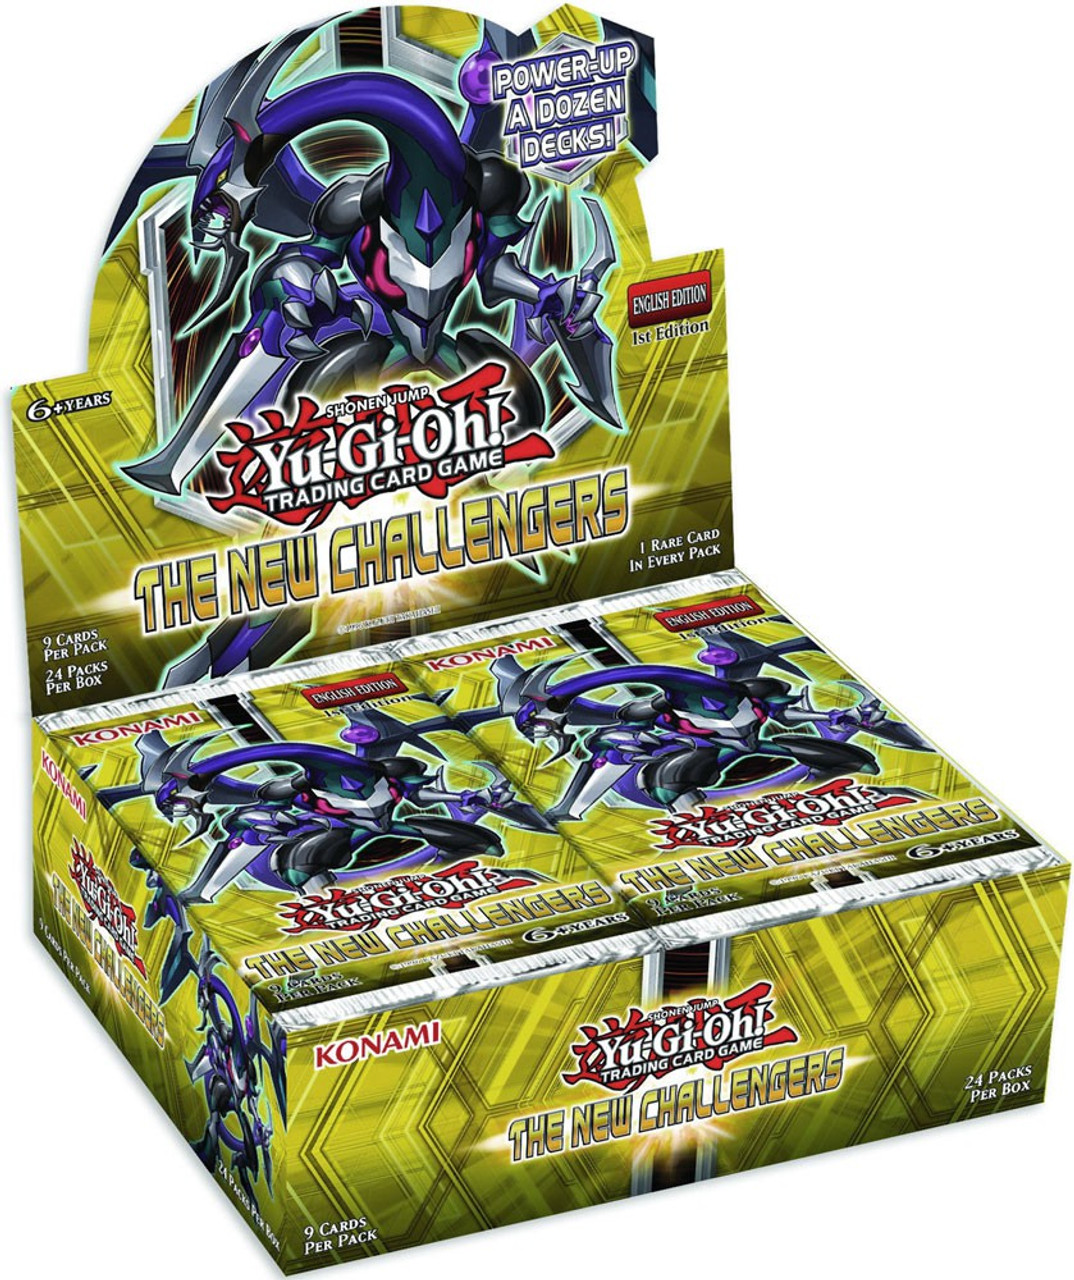 YuGiOh The New Challengers New Challengers Booster Box 24 Packs Konami